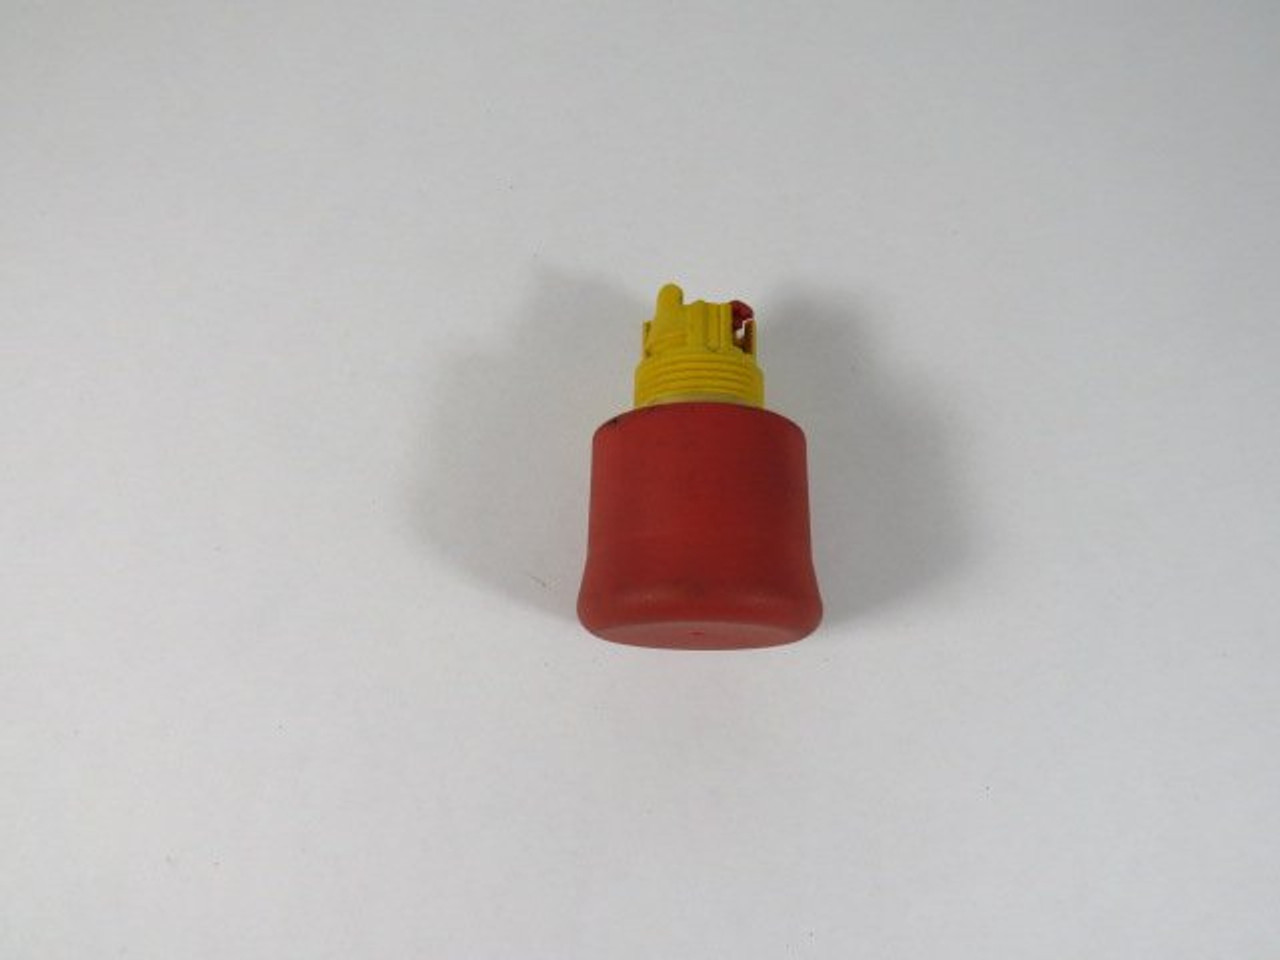 Eaton A22-RPV Red Push Button Operator USED